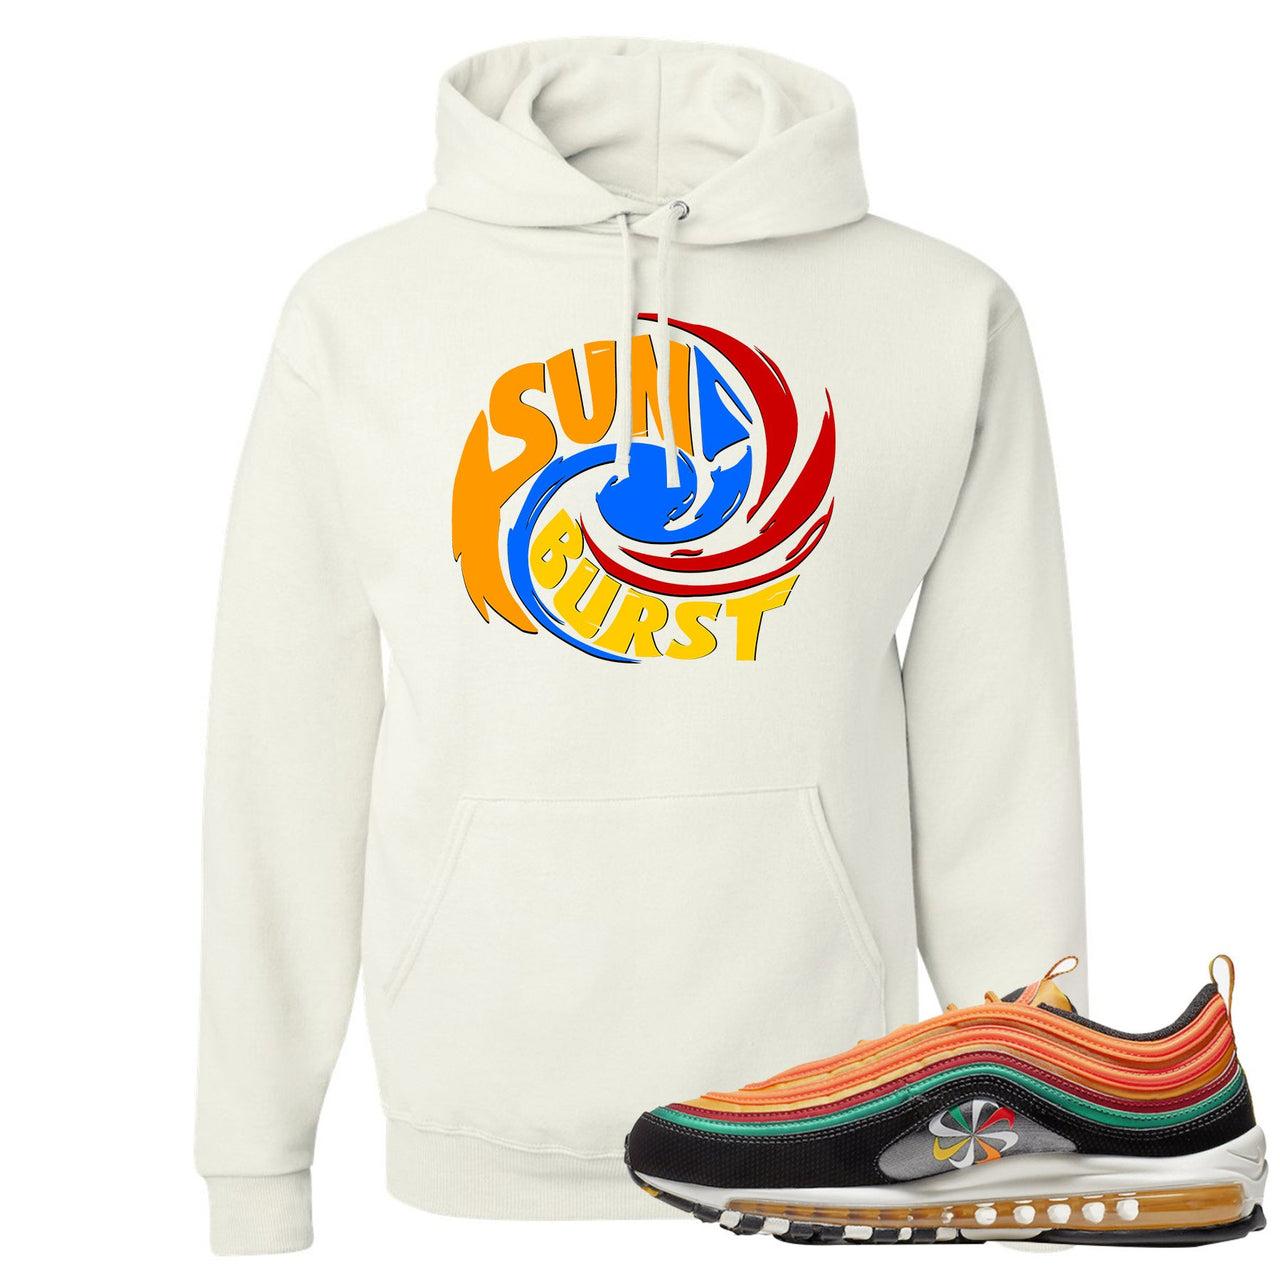 Printed on the front of the Air Max 97 Sunburst white sneaker matching pullover hoodie is the sunburst hurricane logo